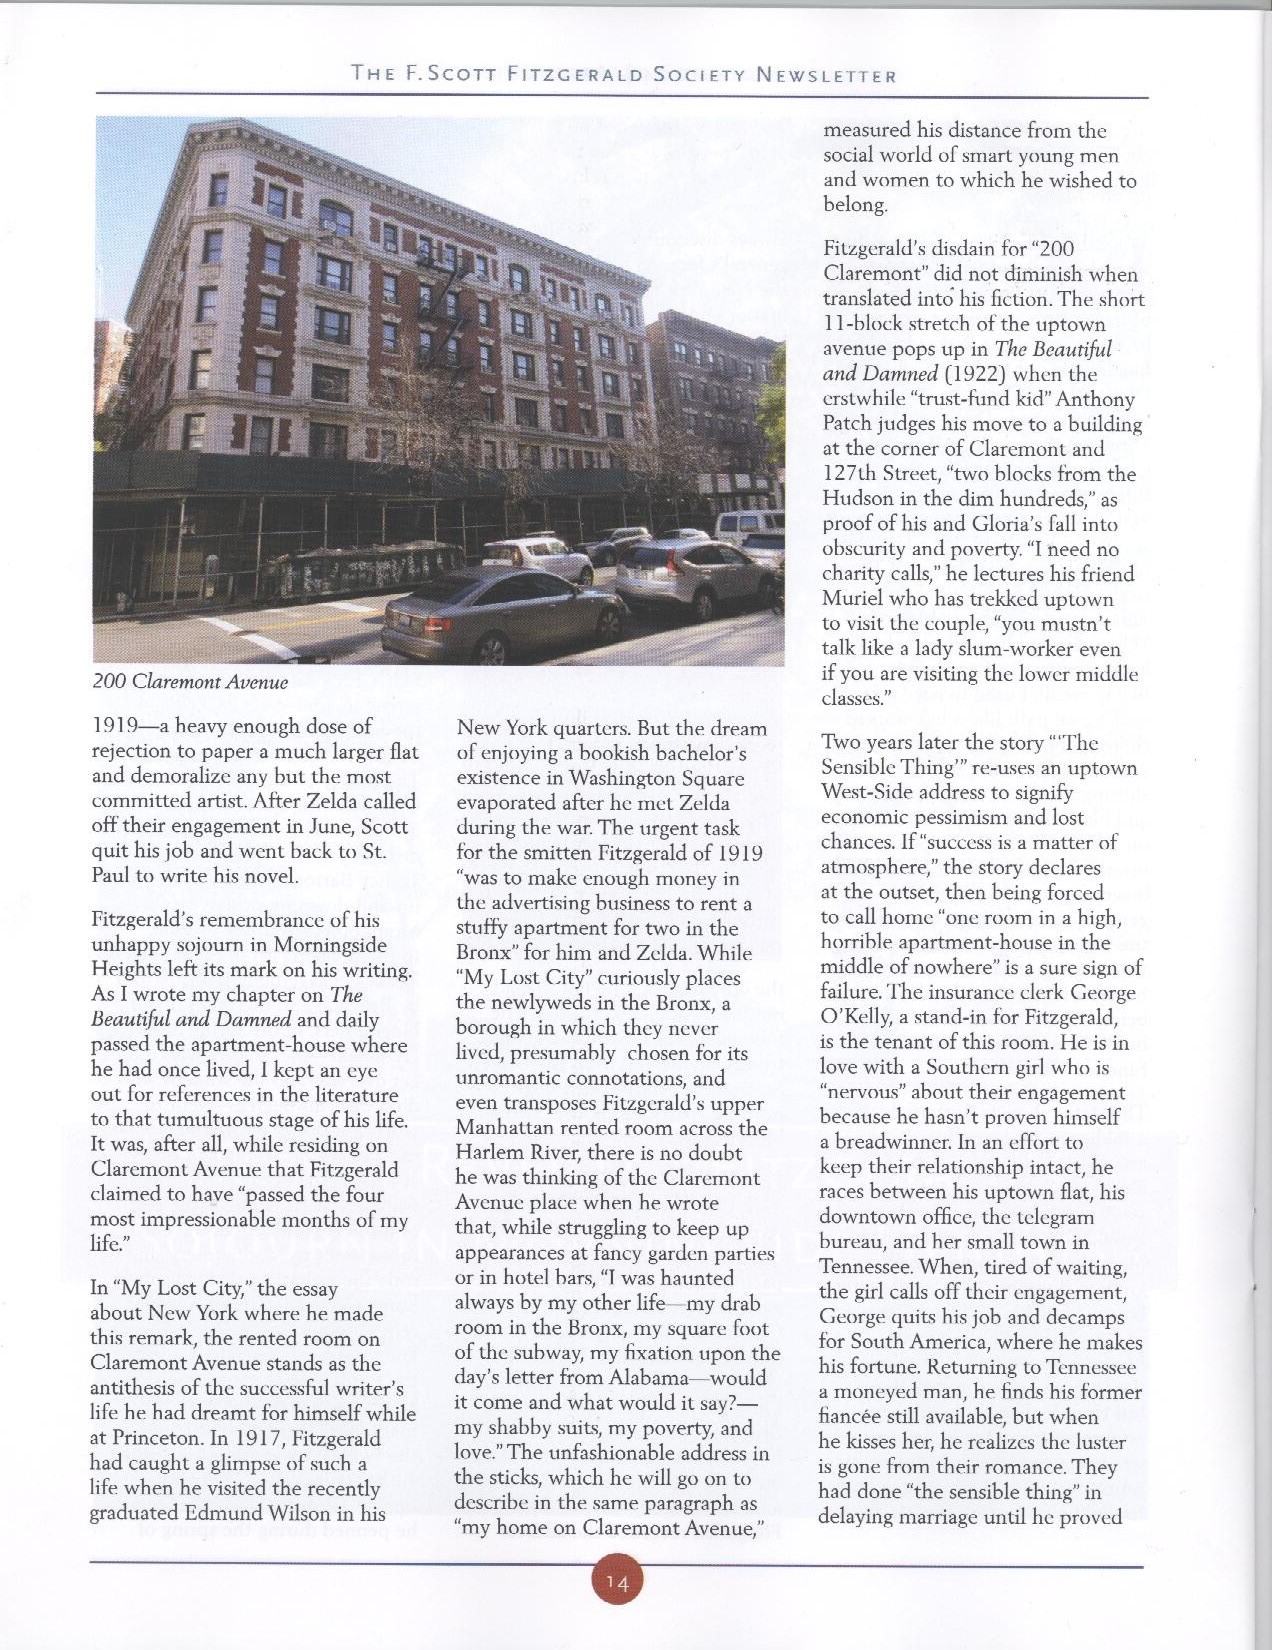 Maney - Fitzgeralds Sojourn in Morningside Heights_Page_4